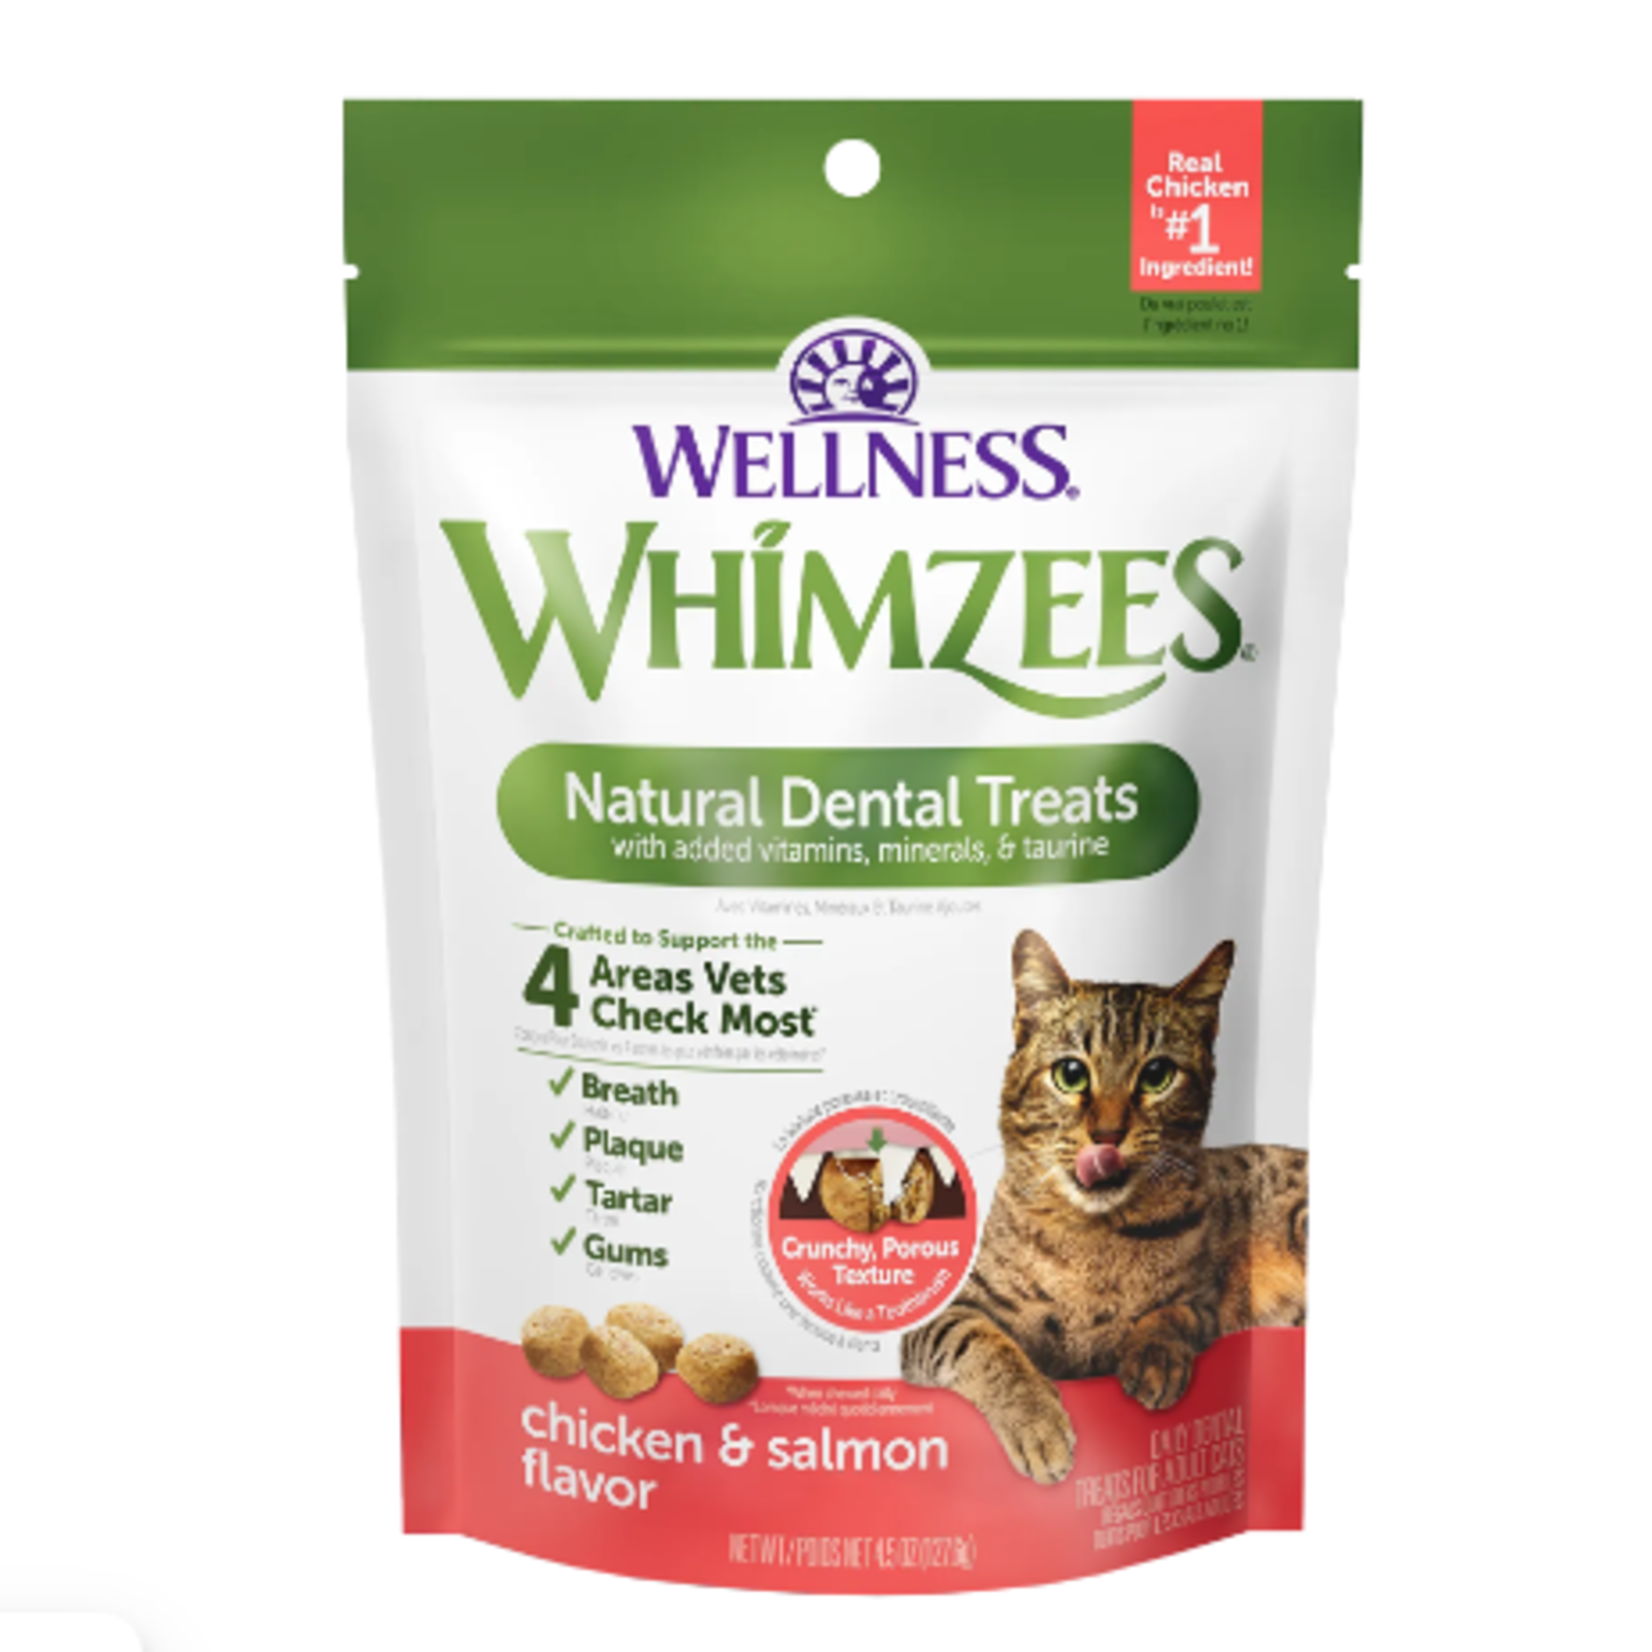 Whimzees Dentaire naturelle pour chat - Treats - Chicken & Salmon